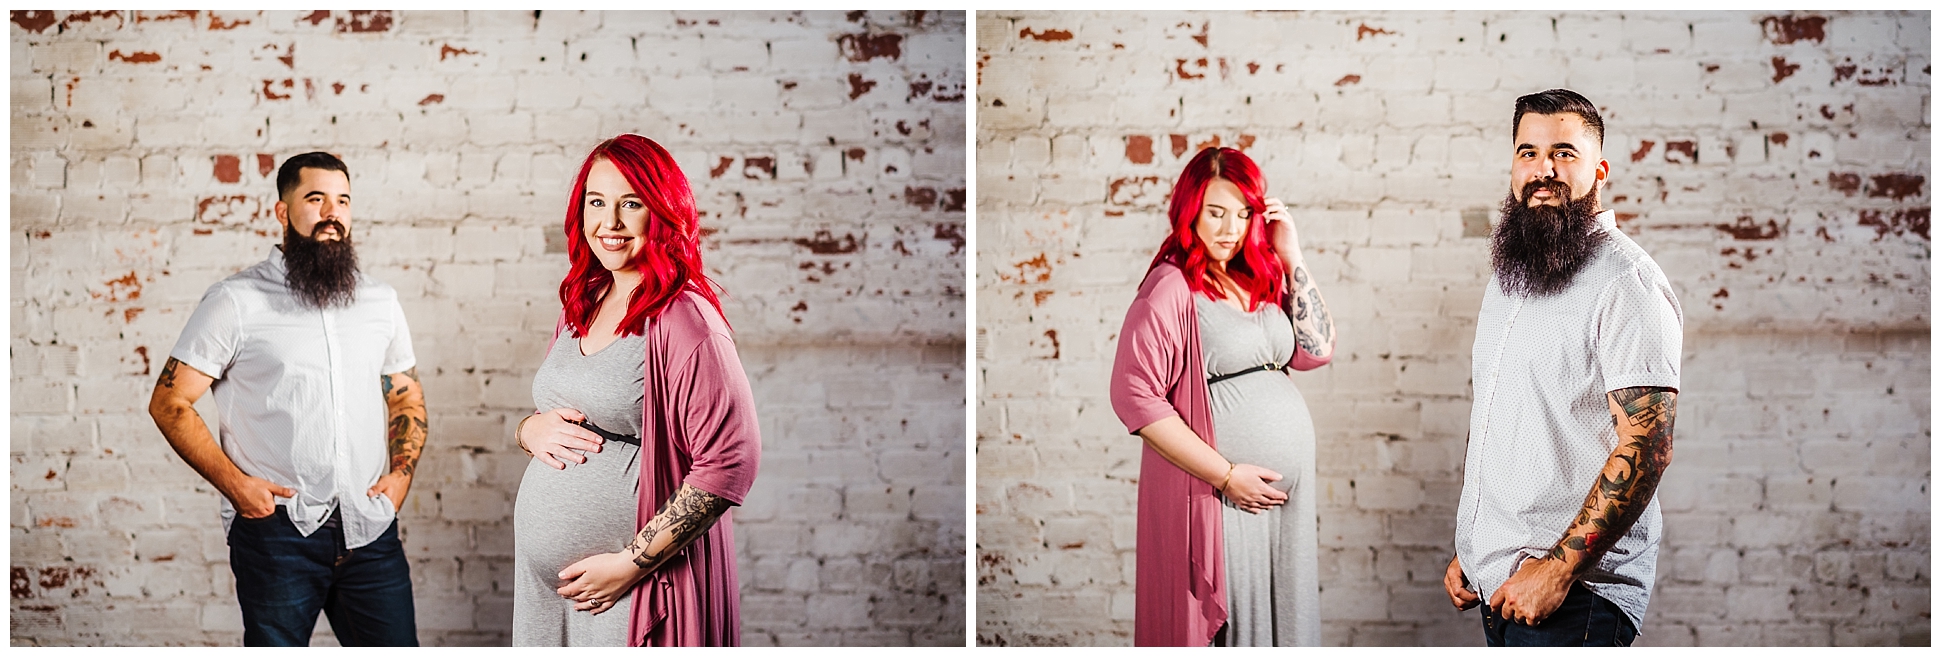 tampa-rad red-maternity-floral dress-armature works-rialto theater_0006.jpg